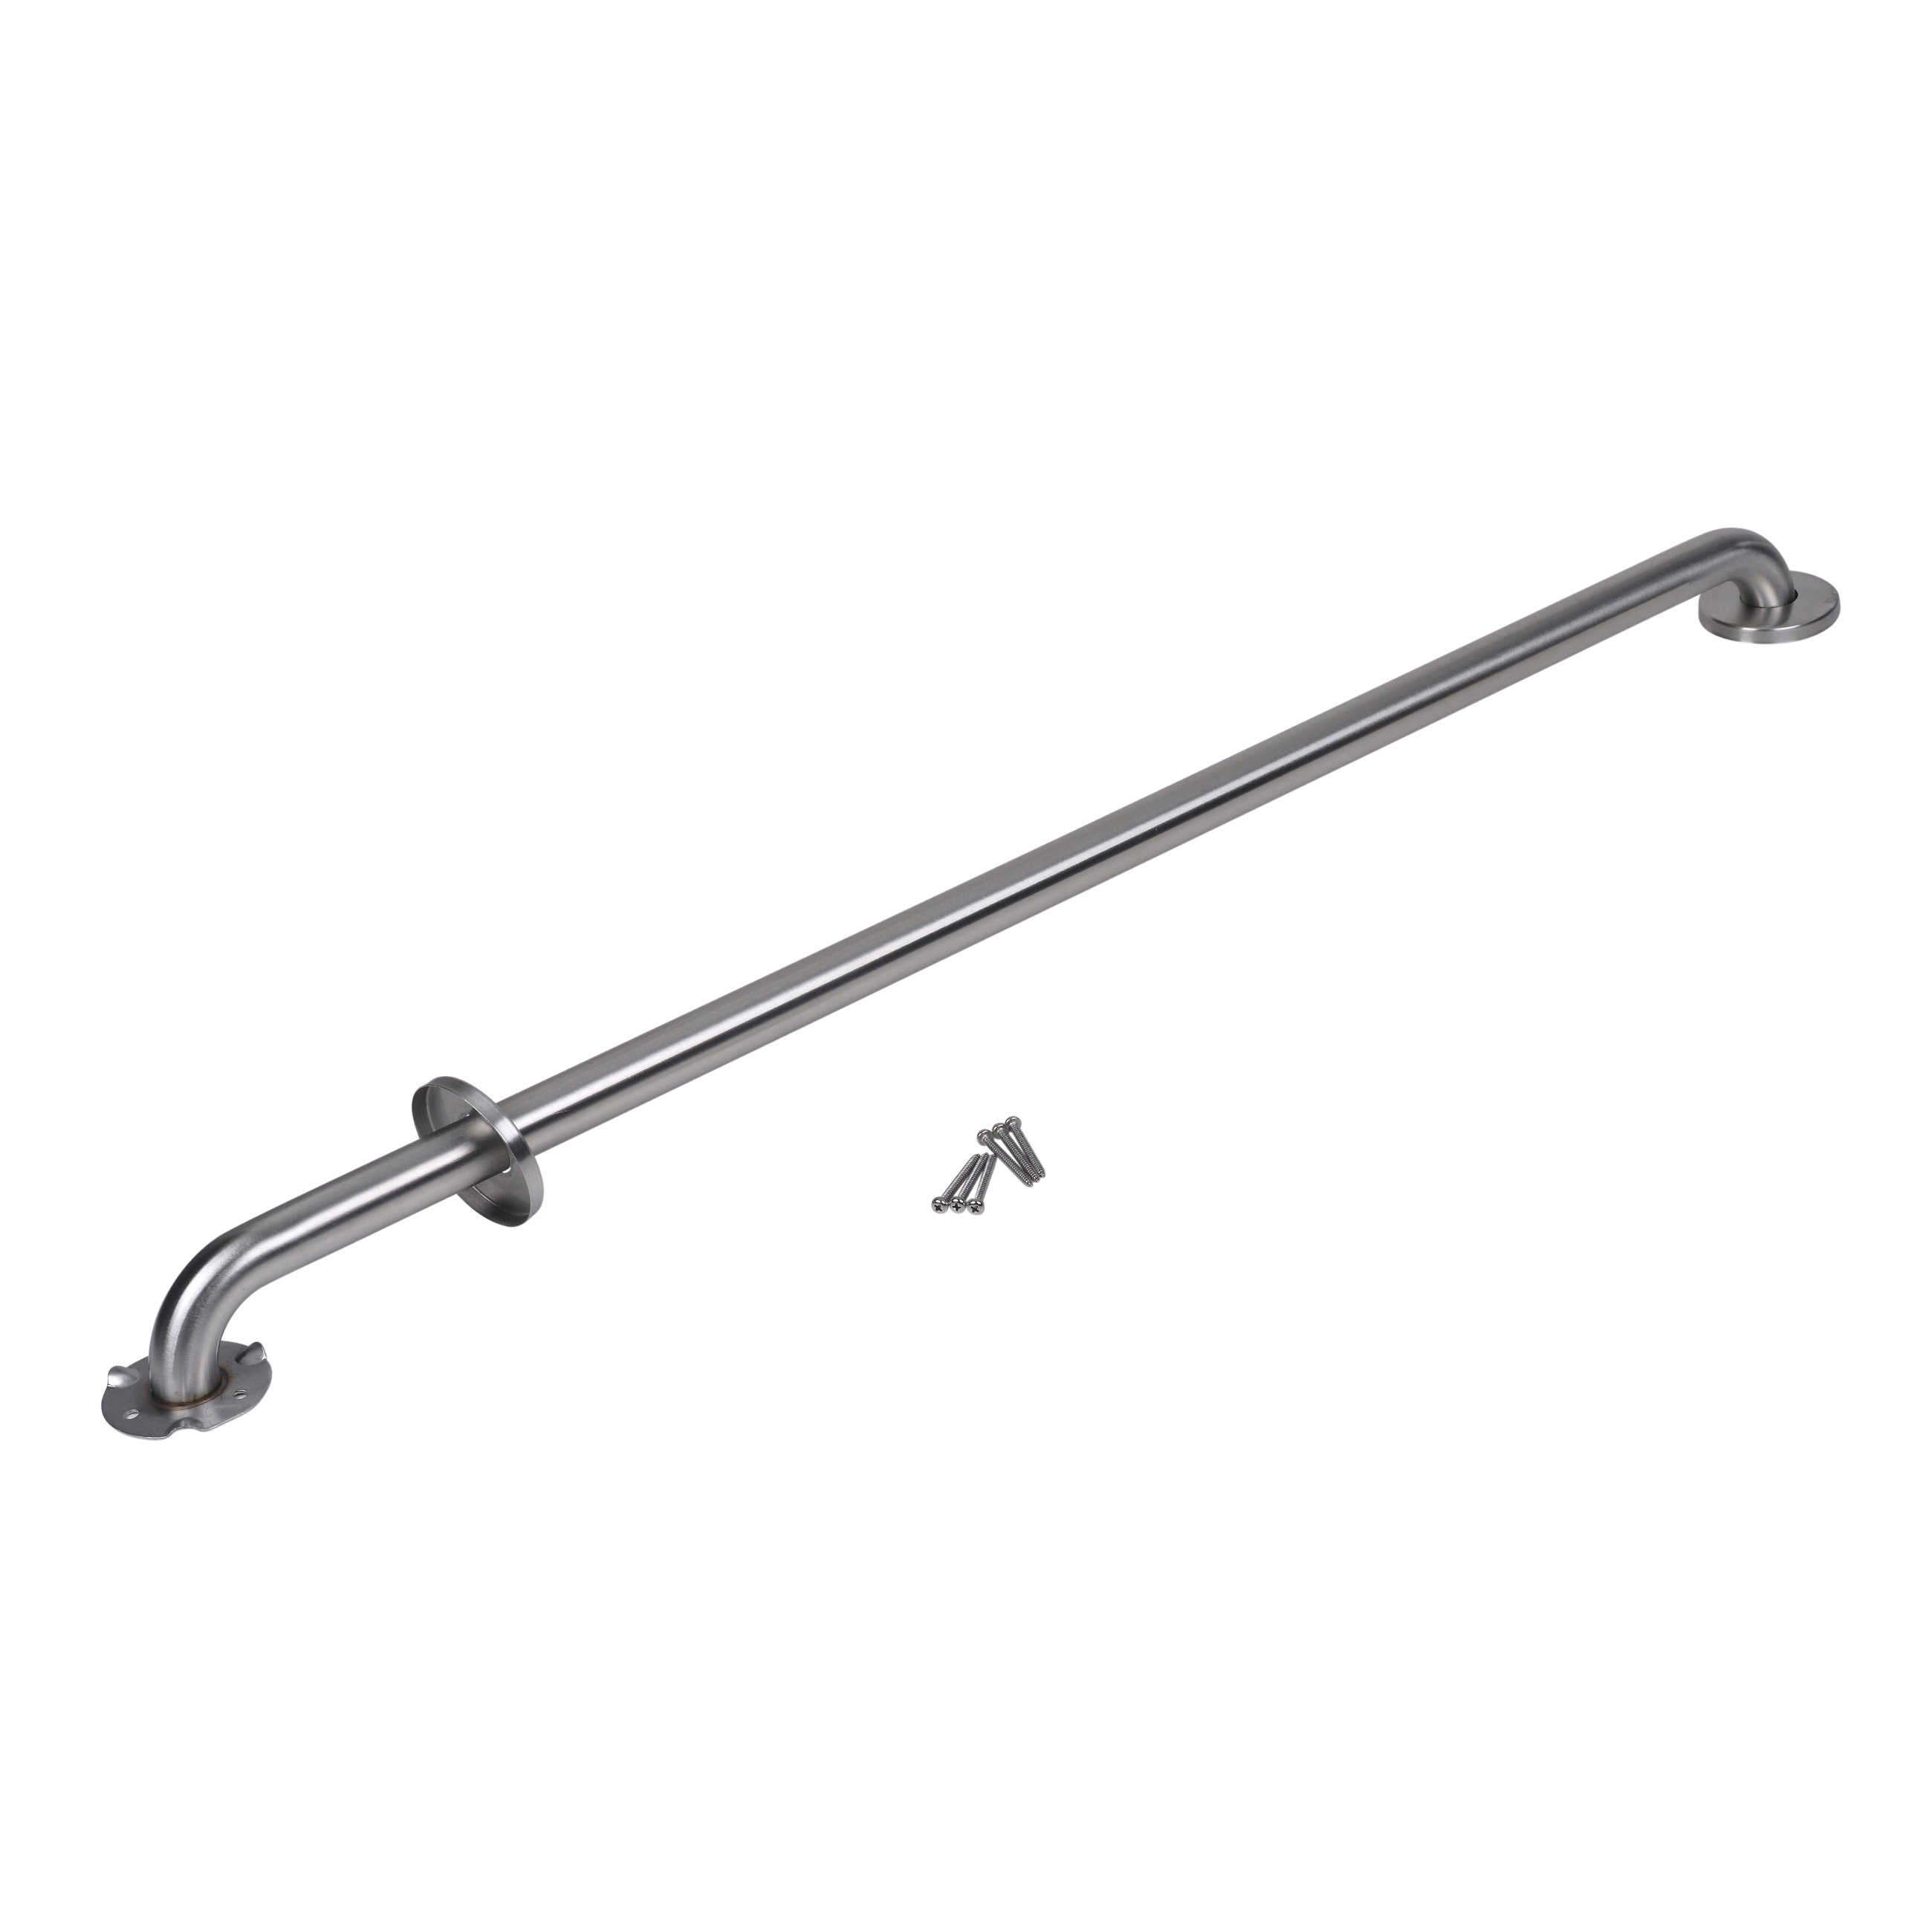 Dearborn® DB8742 Grab Bar, 1-1/4 in Dia x 42 in L, Satin, 304 Stainless Steel, Import